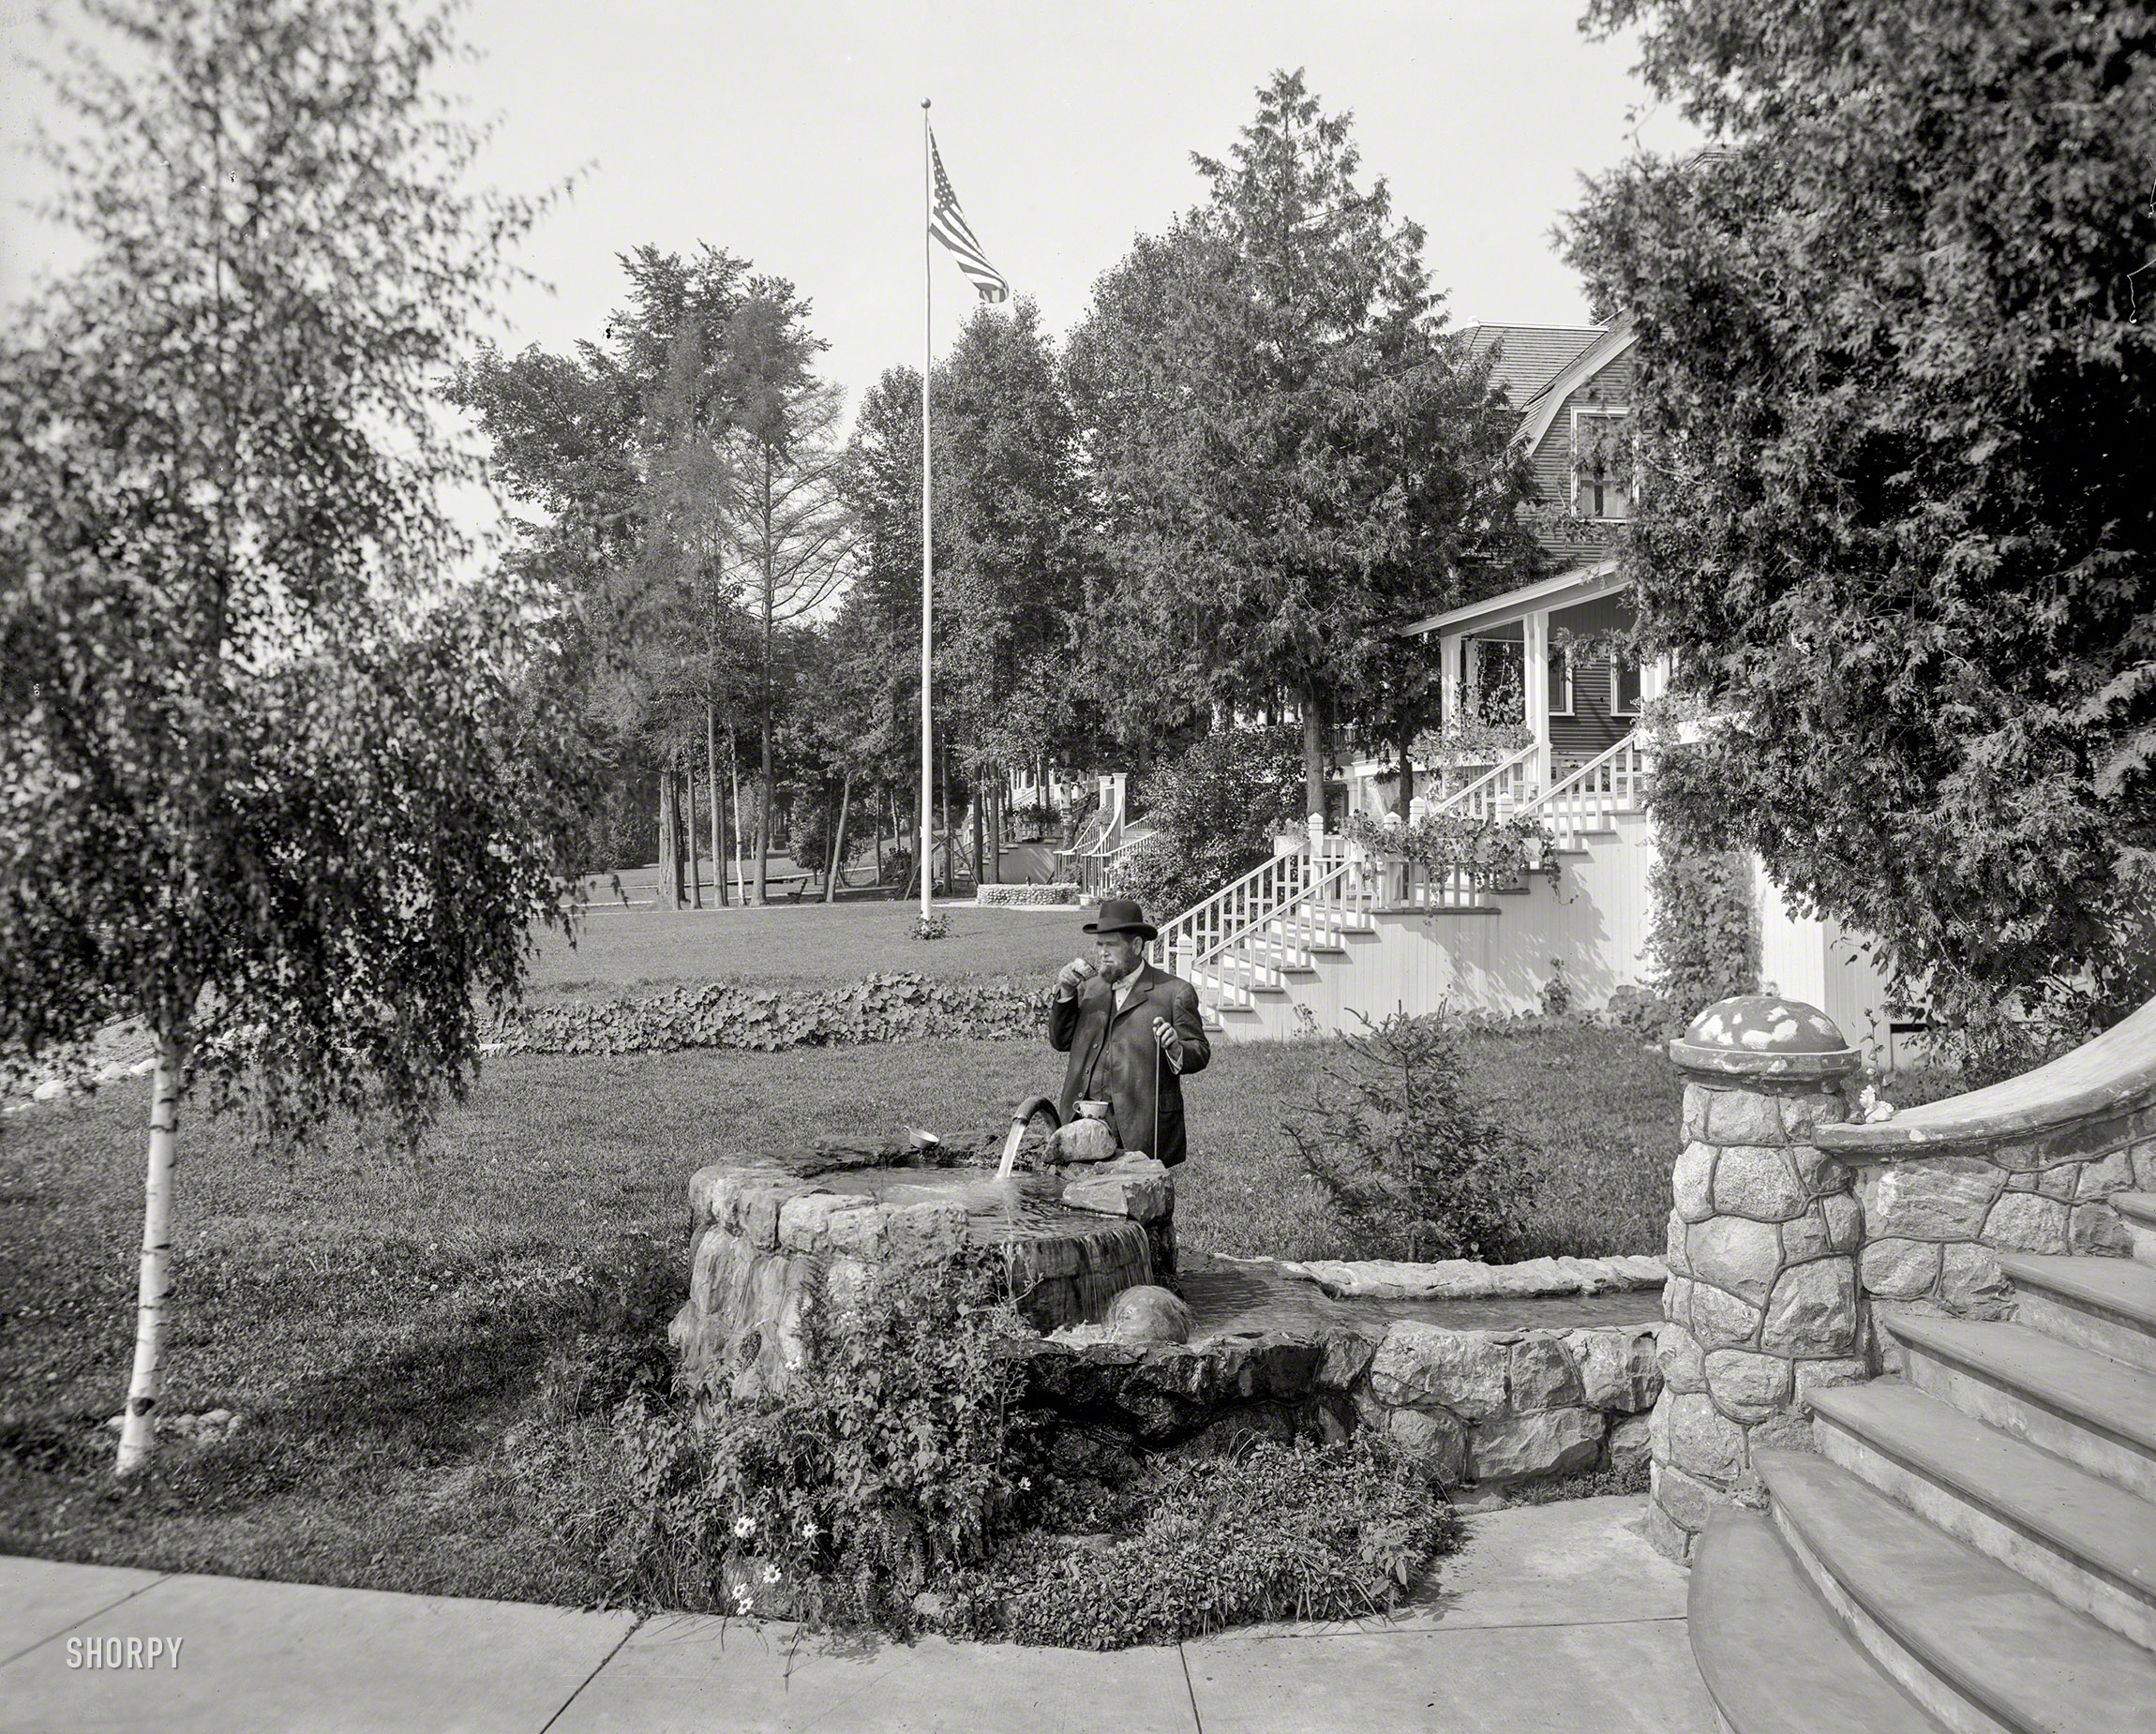 Harbor Springs, Michigan, circa 1906. "A flowing well in Wequetonsing." 8x10 inch dry plate glass negative, Detroit Publishing Company. View full size.